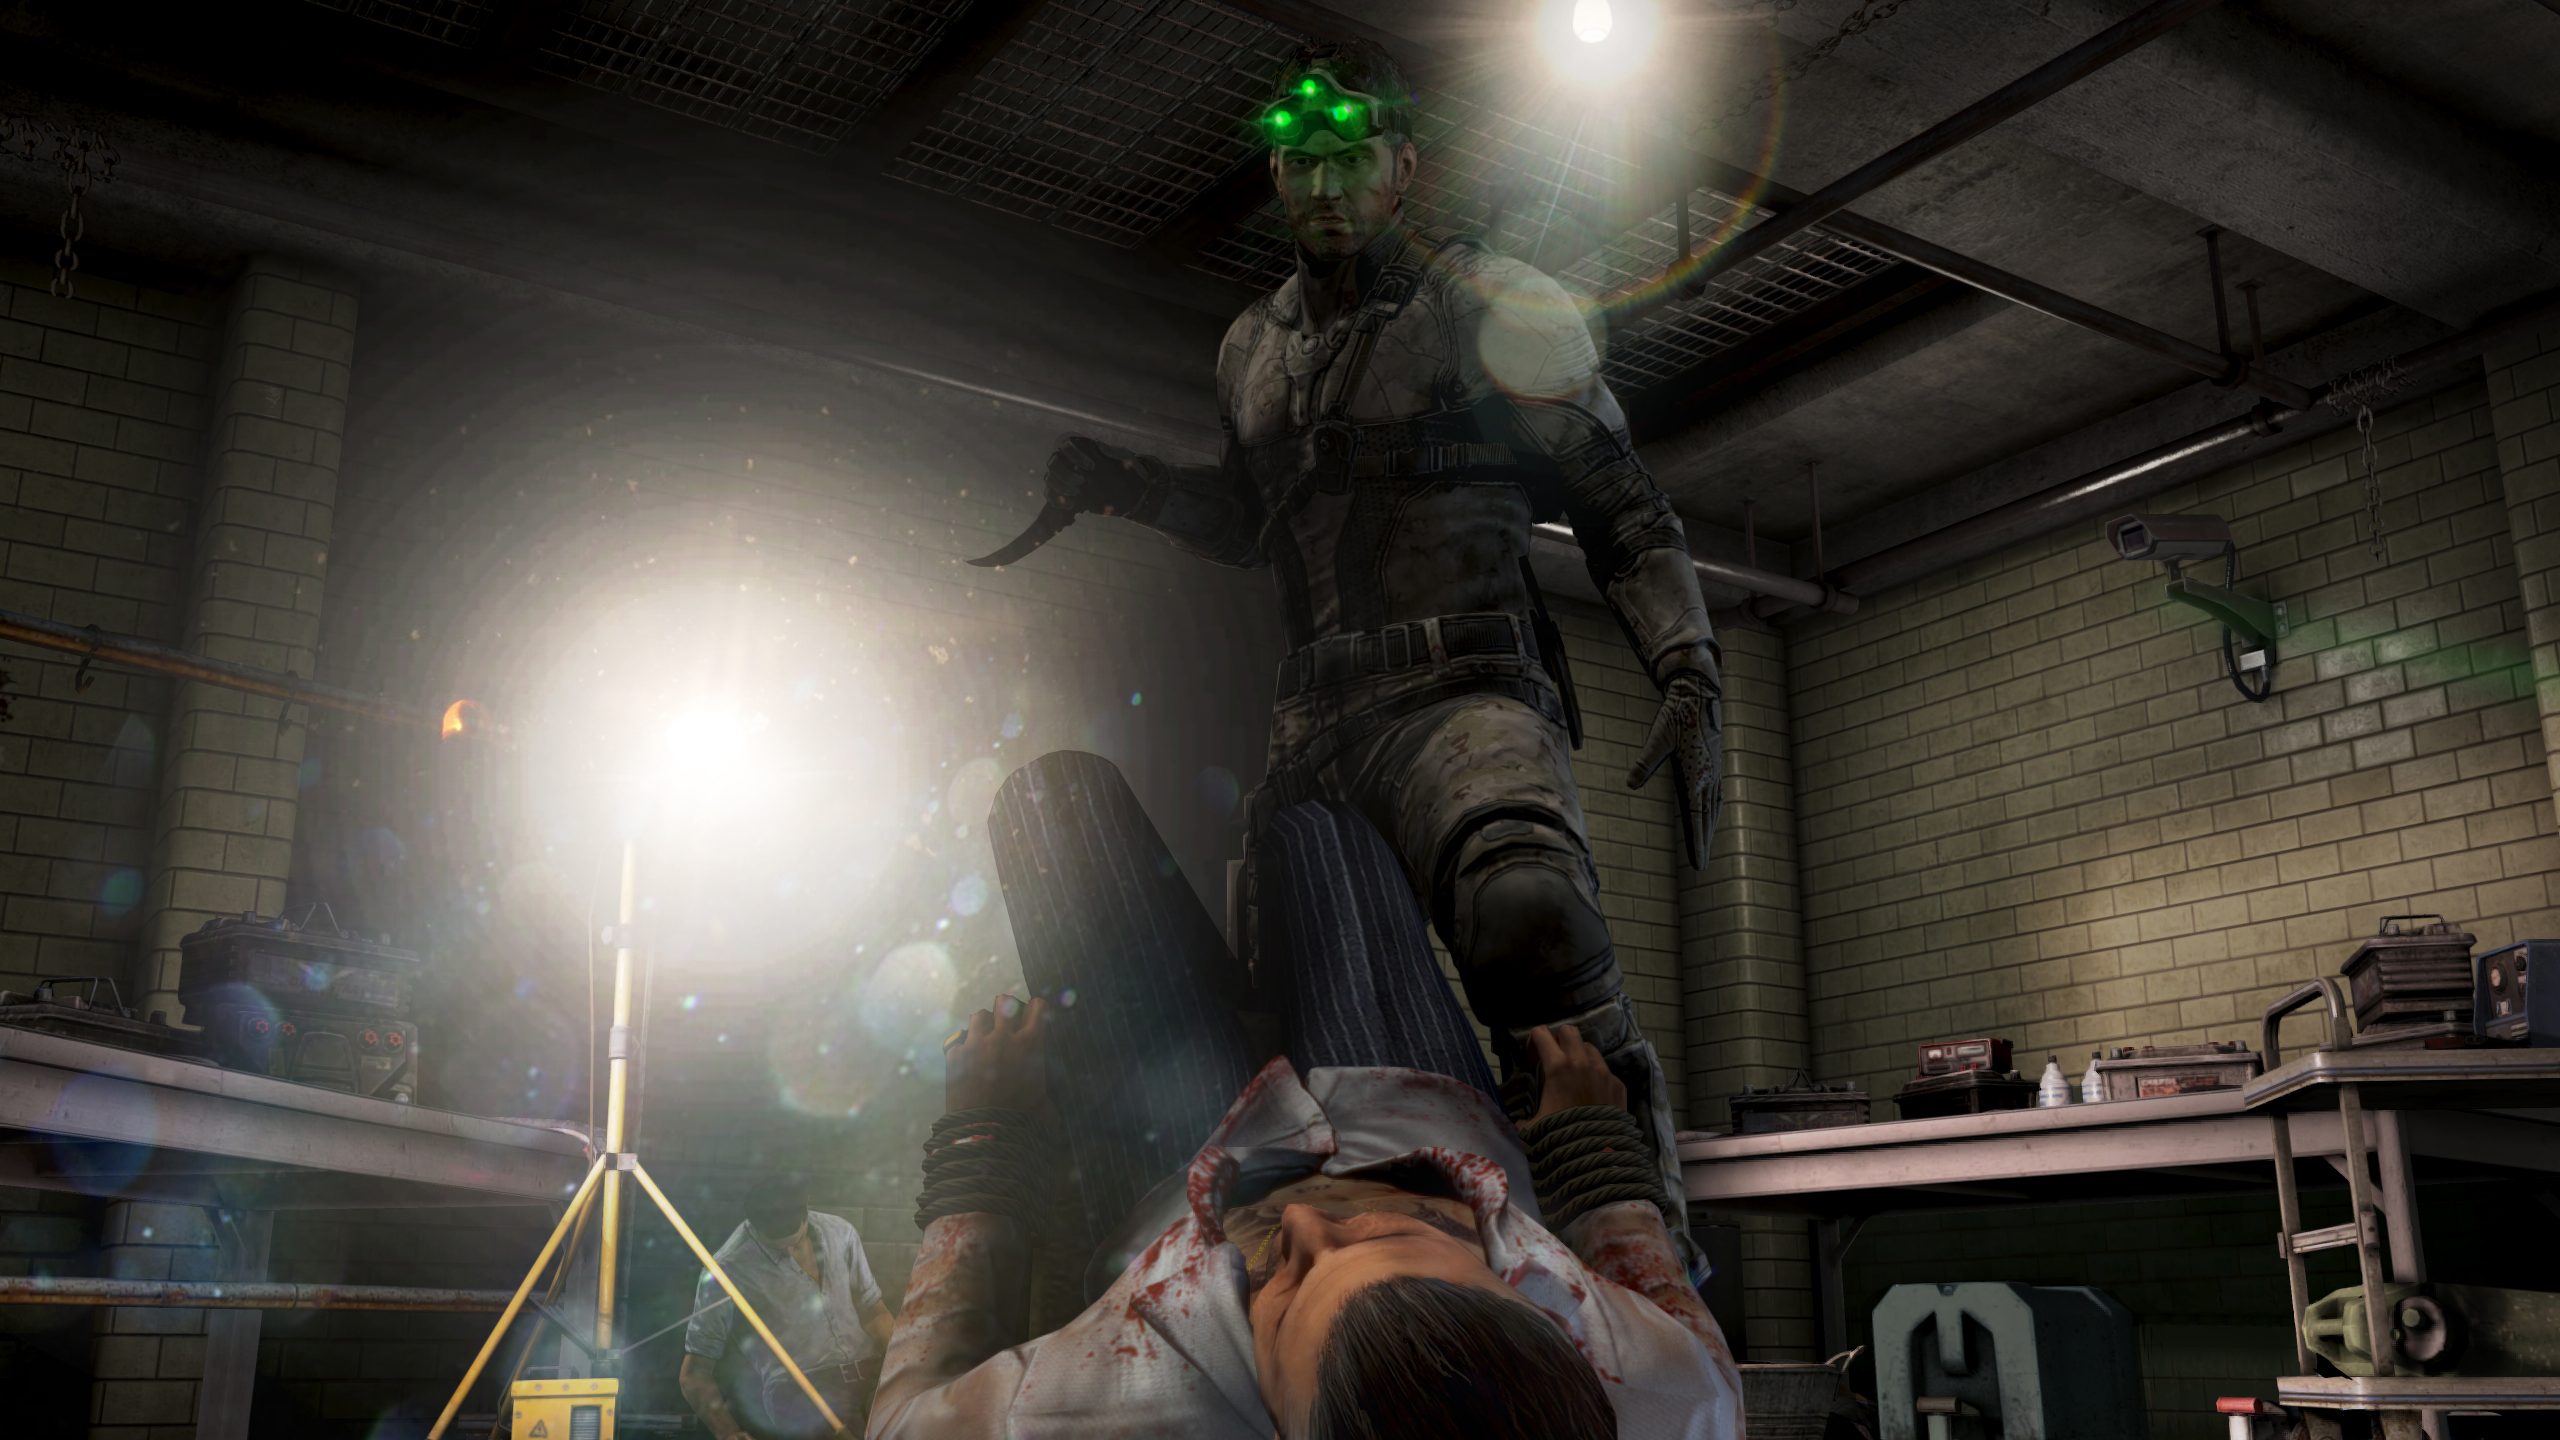 Splinter Cell Remake: Ubisoft is looking to rewrite the story for